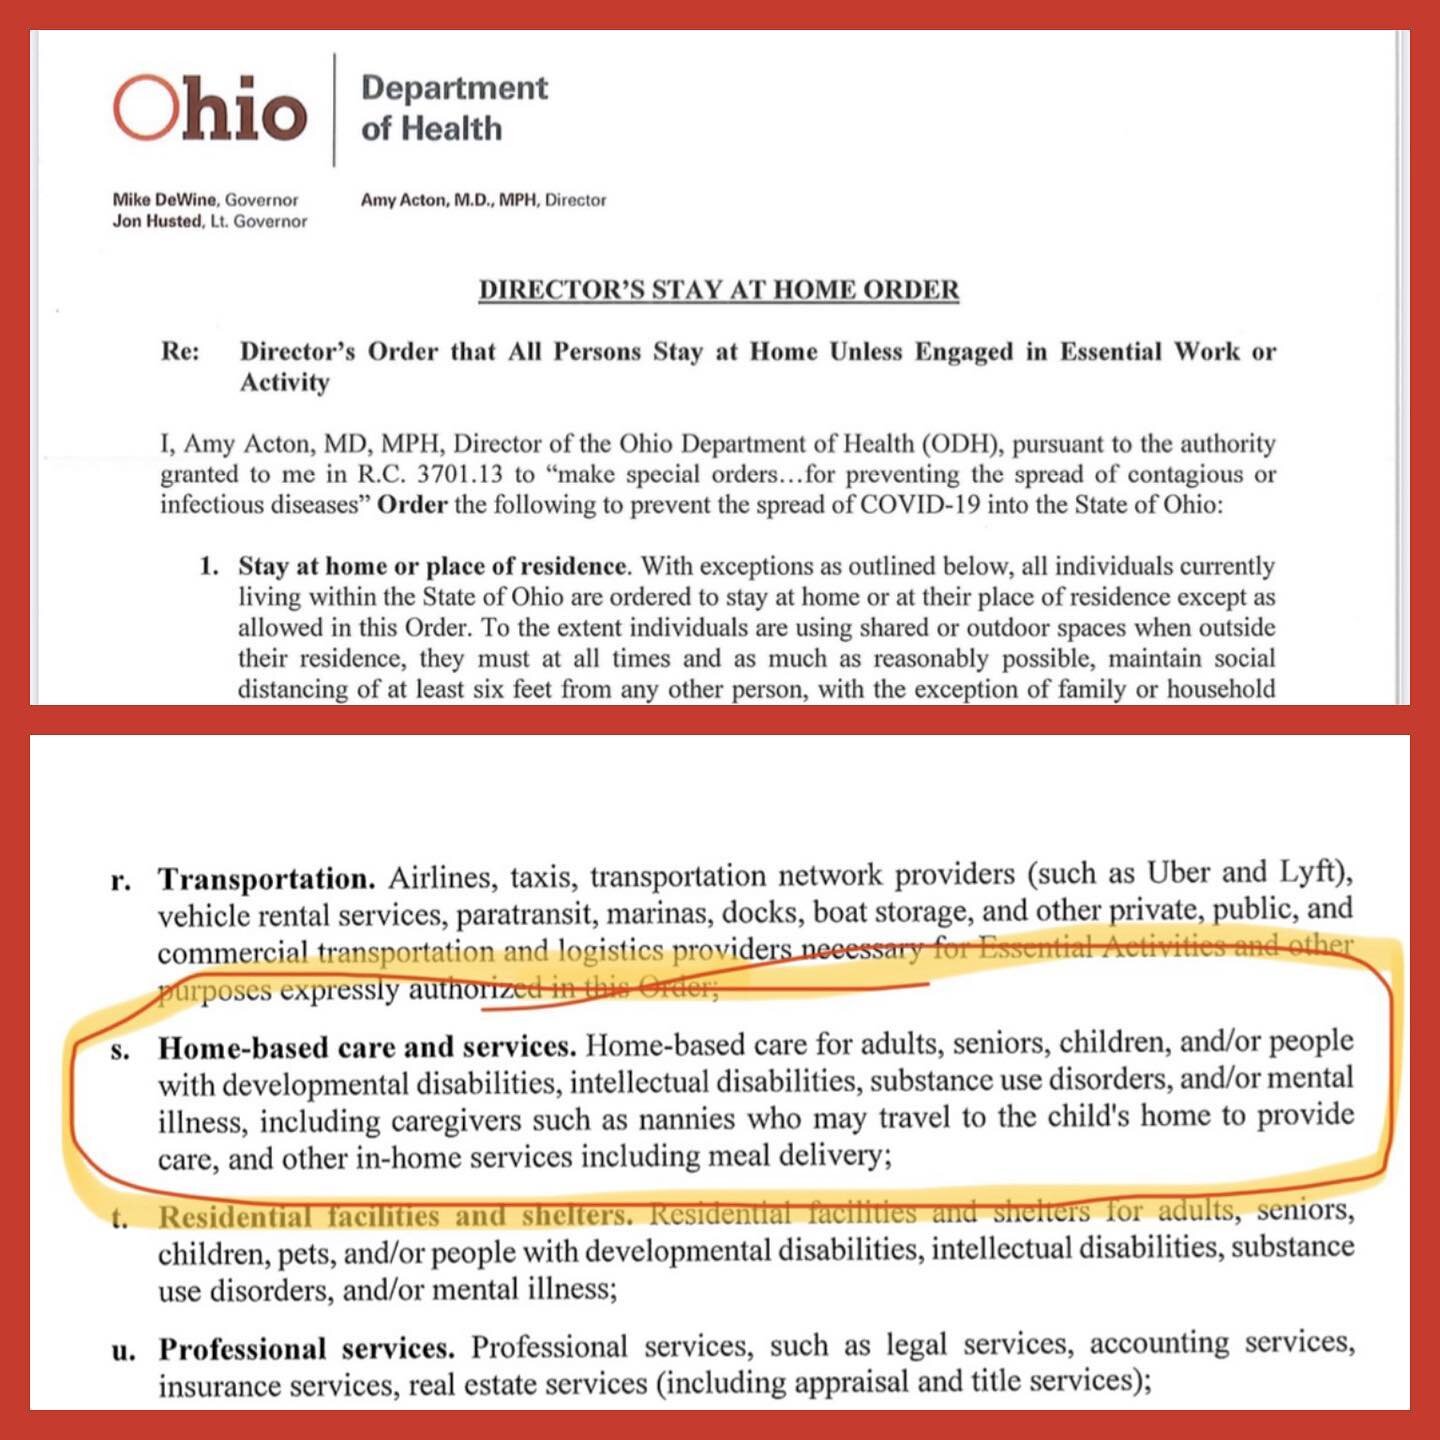 As you have probably heard, the Director of the Ohio Department of Health today issued a &quot;Stay at Home Order&quot; which goes into effect at 11:59 p.m. on Monday, March 23, 2020 and lasts until 11:59 p.m. on April 6, 2020. 
HOWEVER home daycares